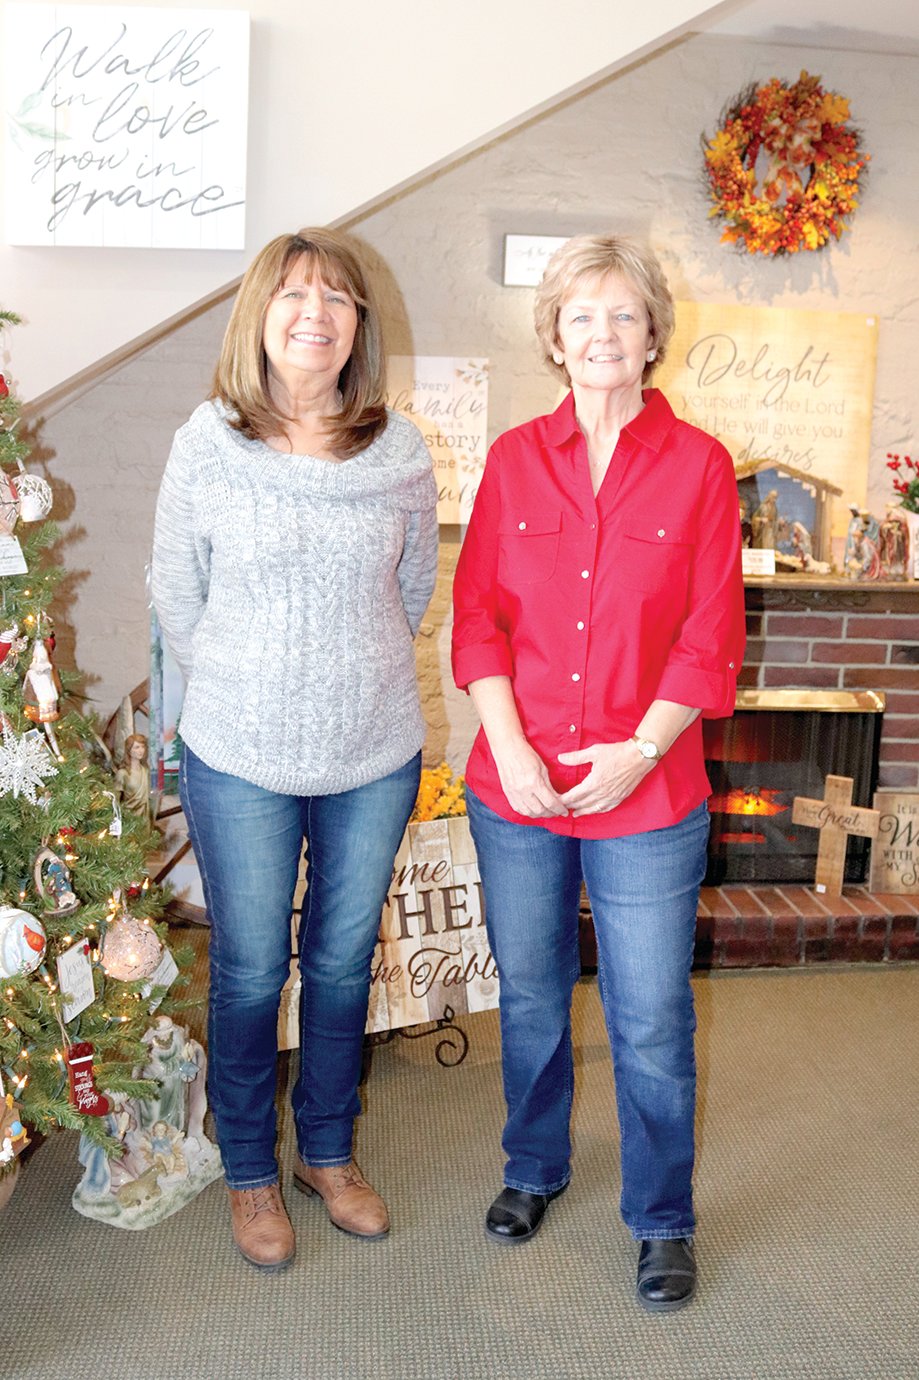 In His Time owner Jaci Cox, from left, and manager Brenda Spencer welcome holiday shoppers to their downtown Crawfordsville storefront Friday afternoon.